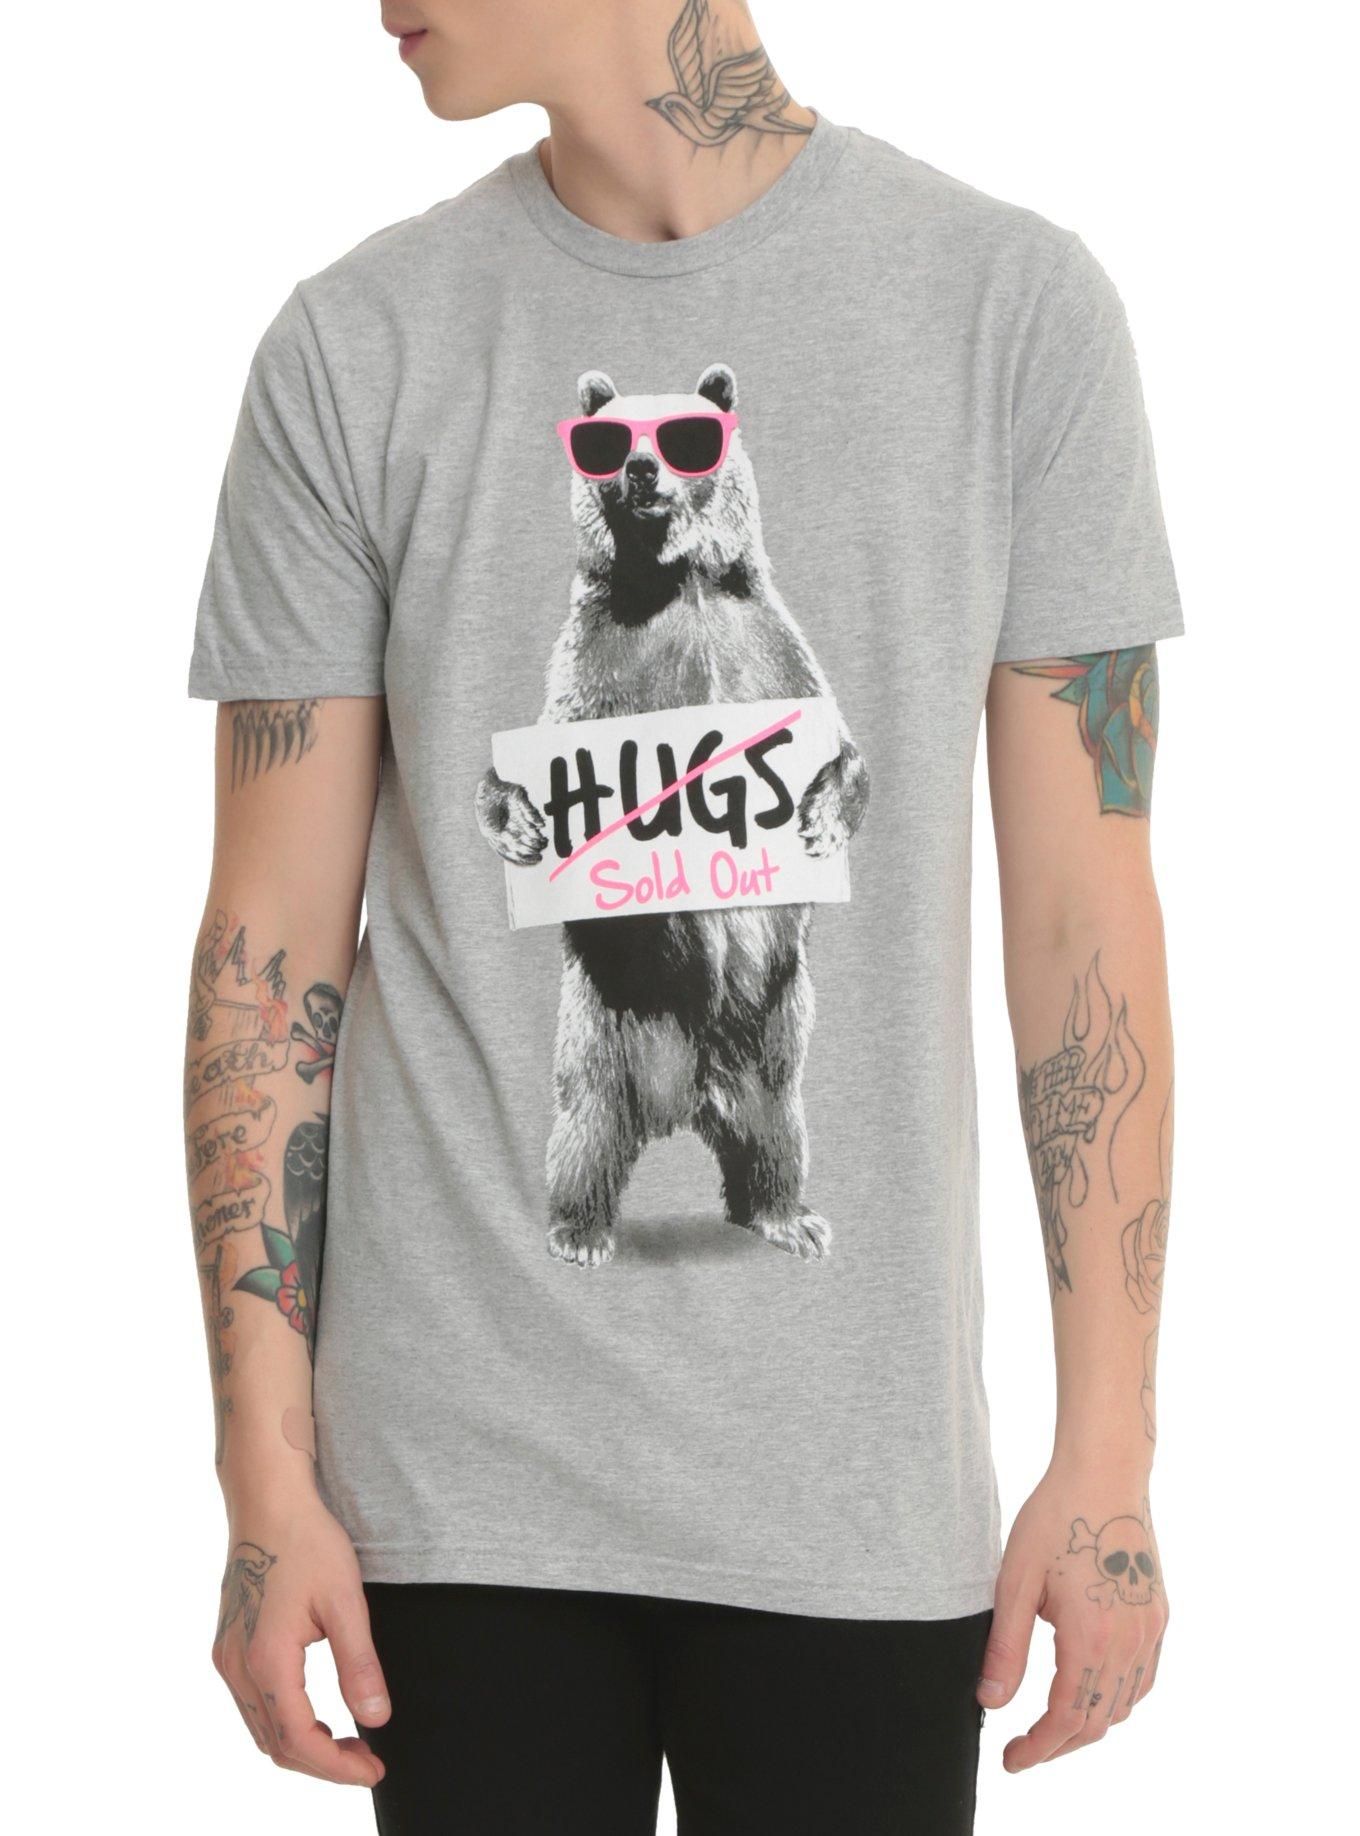 Bear Hugs Sold Out T-Shirt | Hot Topic